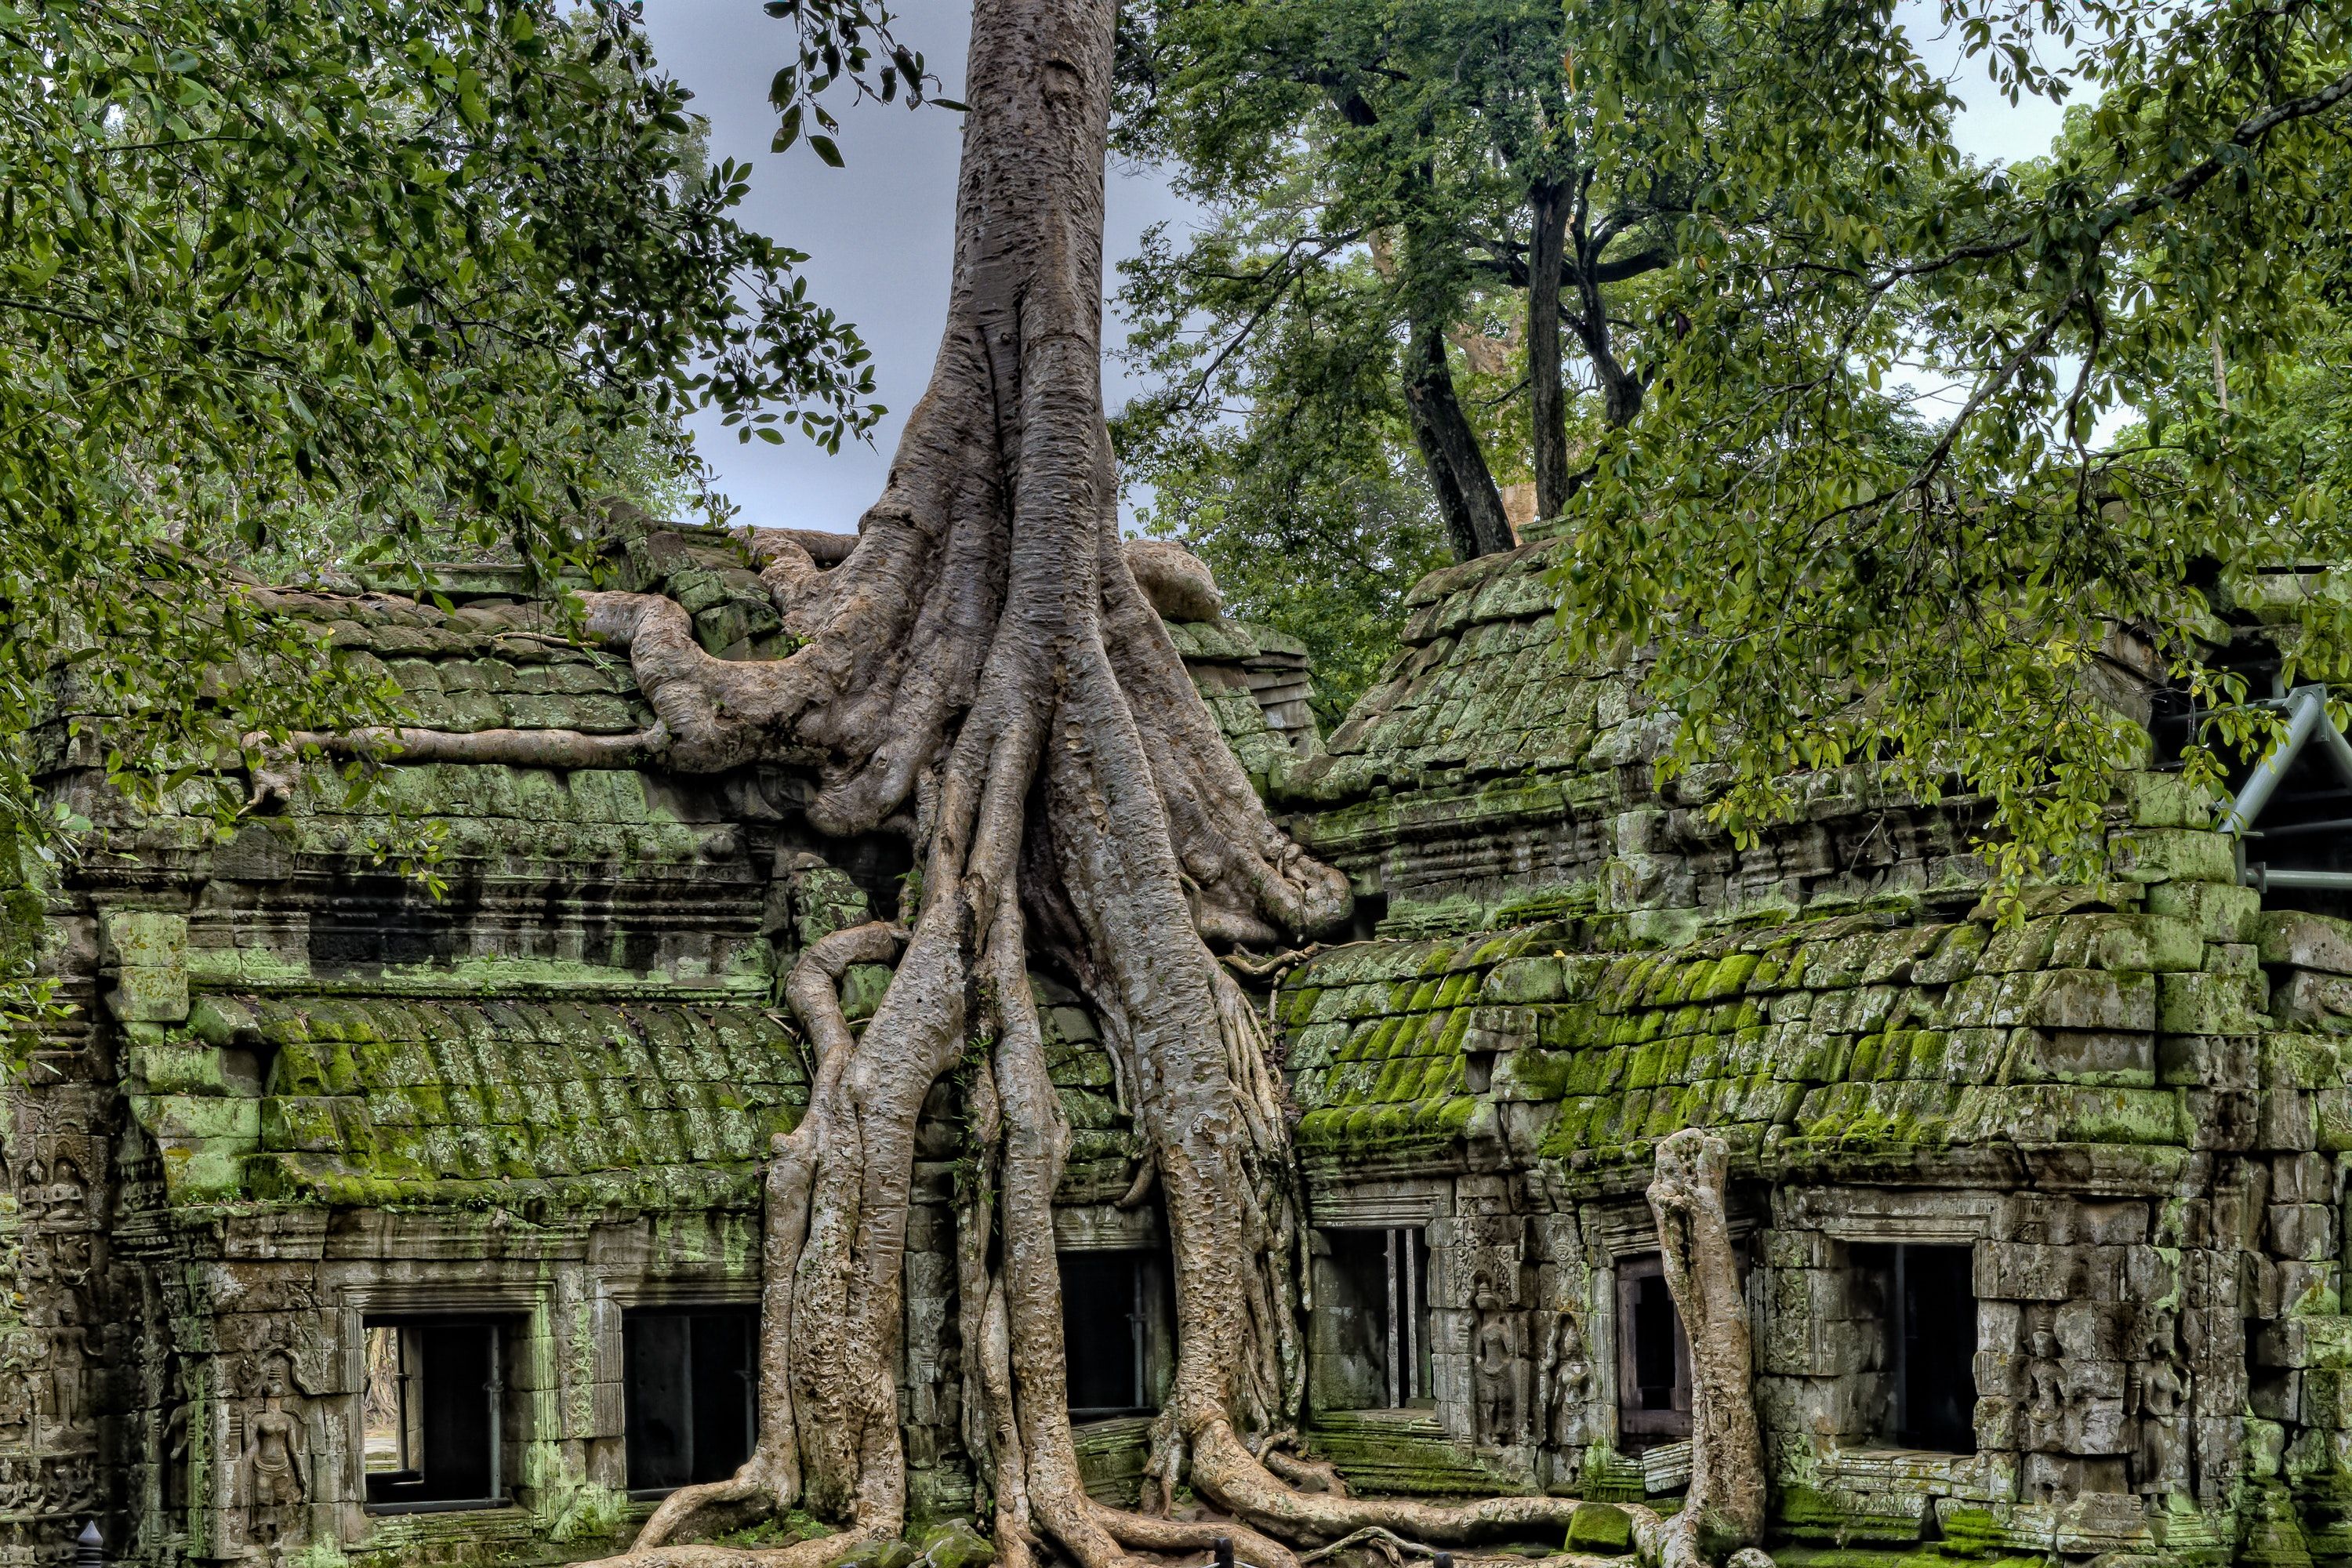 At Ta Prohm's ancient temple ruins, the stone structures are covered in thick foliage. In this image, a large tree's roots cover an entire temple.